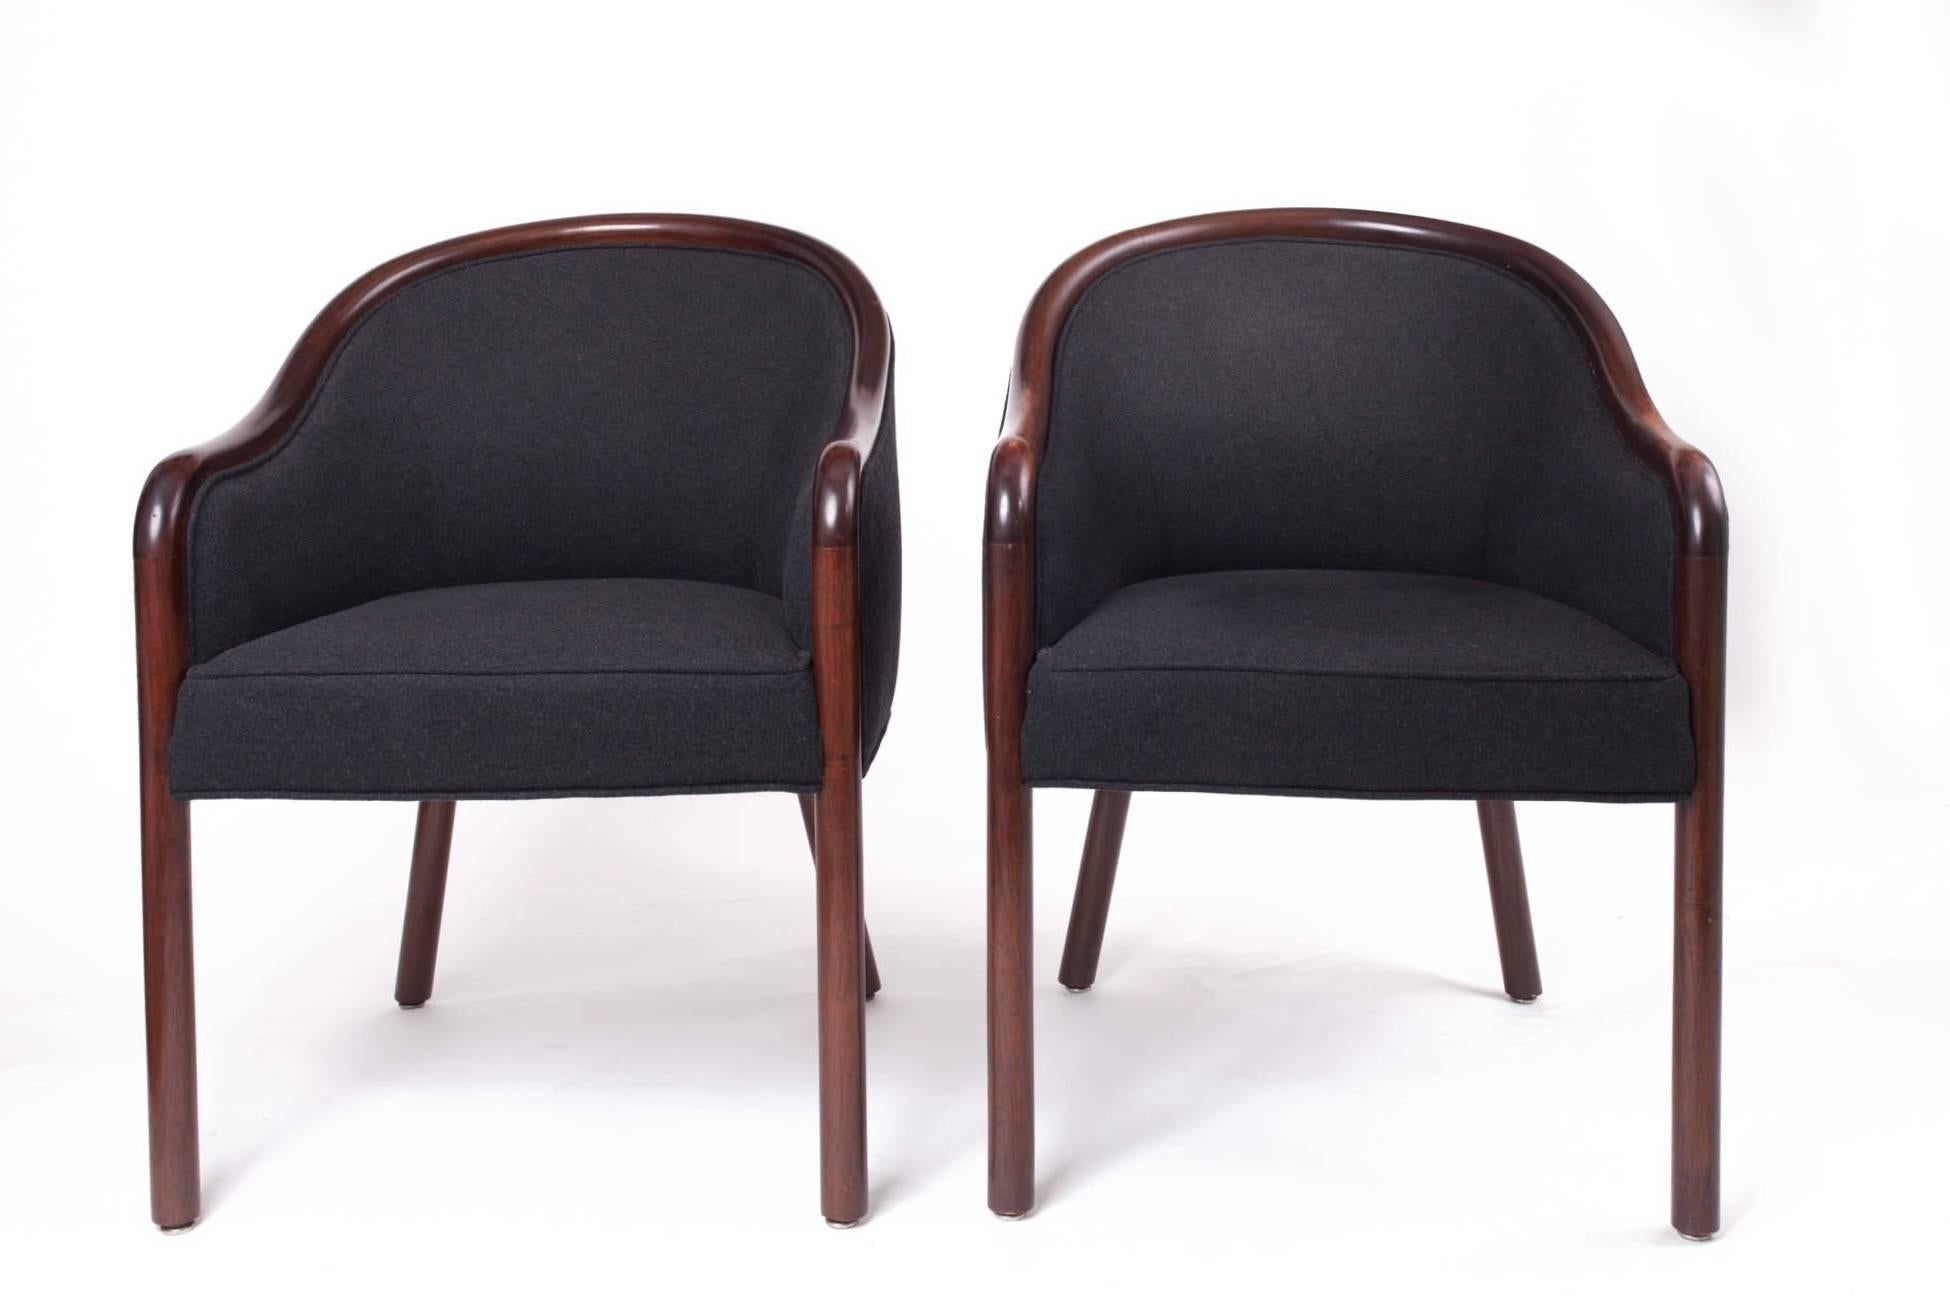 Ward Bennett (1917–2003)

A graceful and welcoming pair of club armchairs by Ward Bennett for Brickel Associates, with sinuous Bauhaus-influenced arms, a plush seat, and flared rounded back legs offset by straight rounded front legs. In a rich, dark